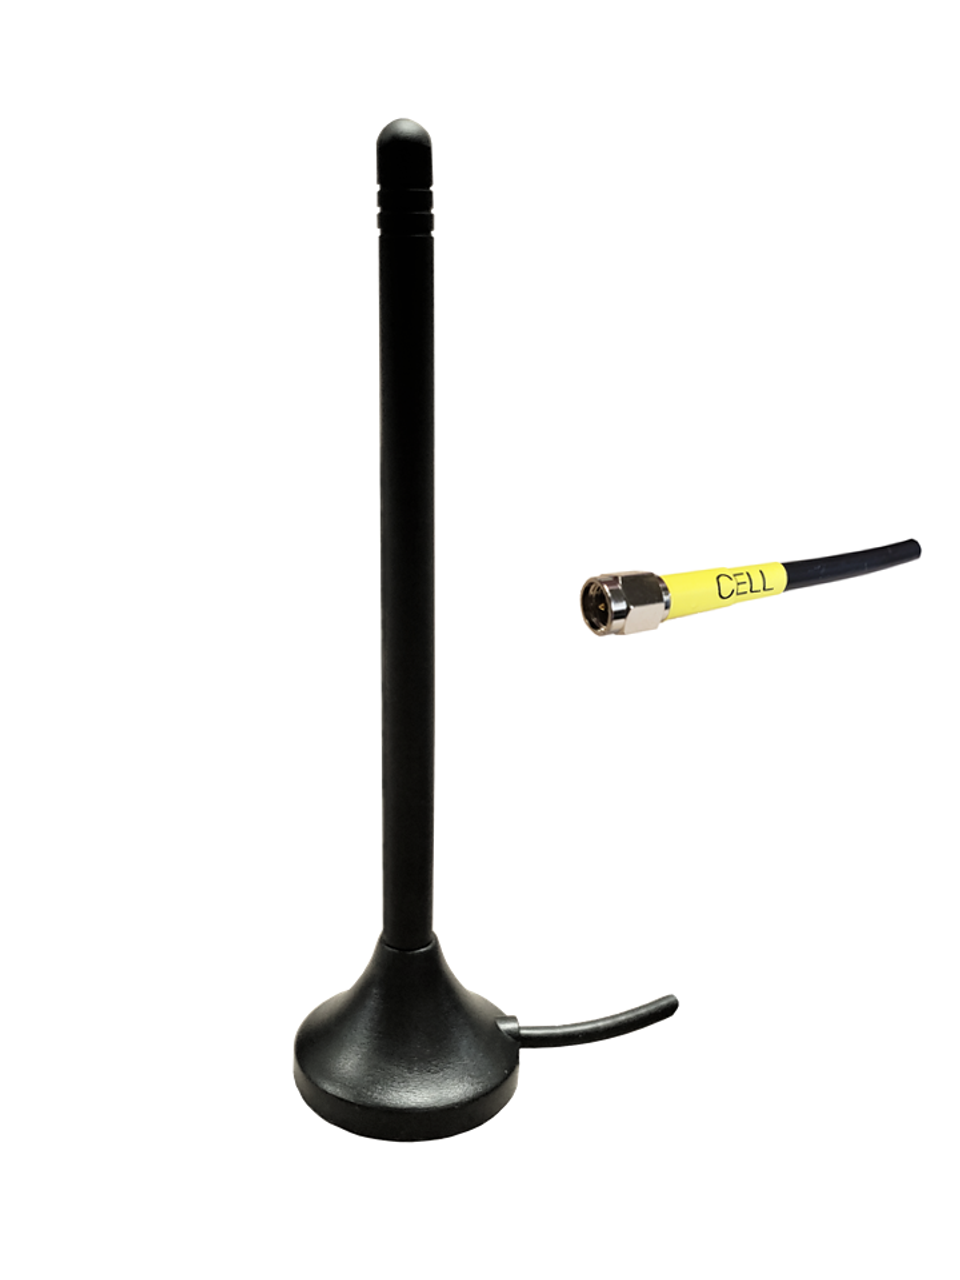 4.5" 3dB Omni-Directional External Antenna w/ Magnetic Mount for Inseego SKYUS-140 Gateway